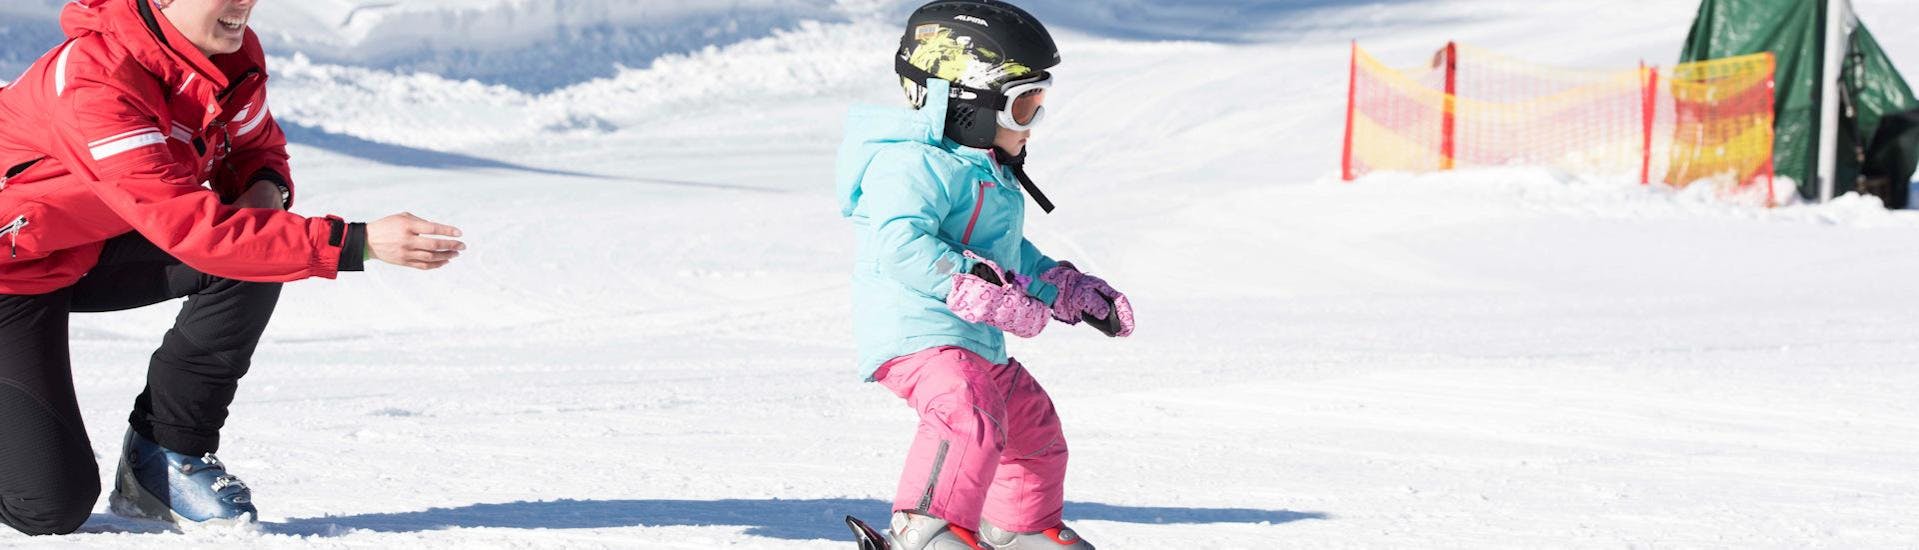 Ski Lessons for Kids (from 5 years) - Intermediate.